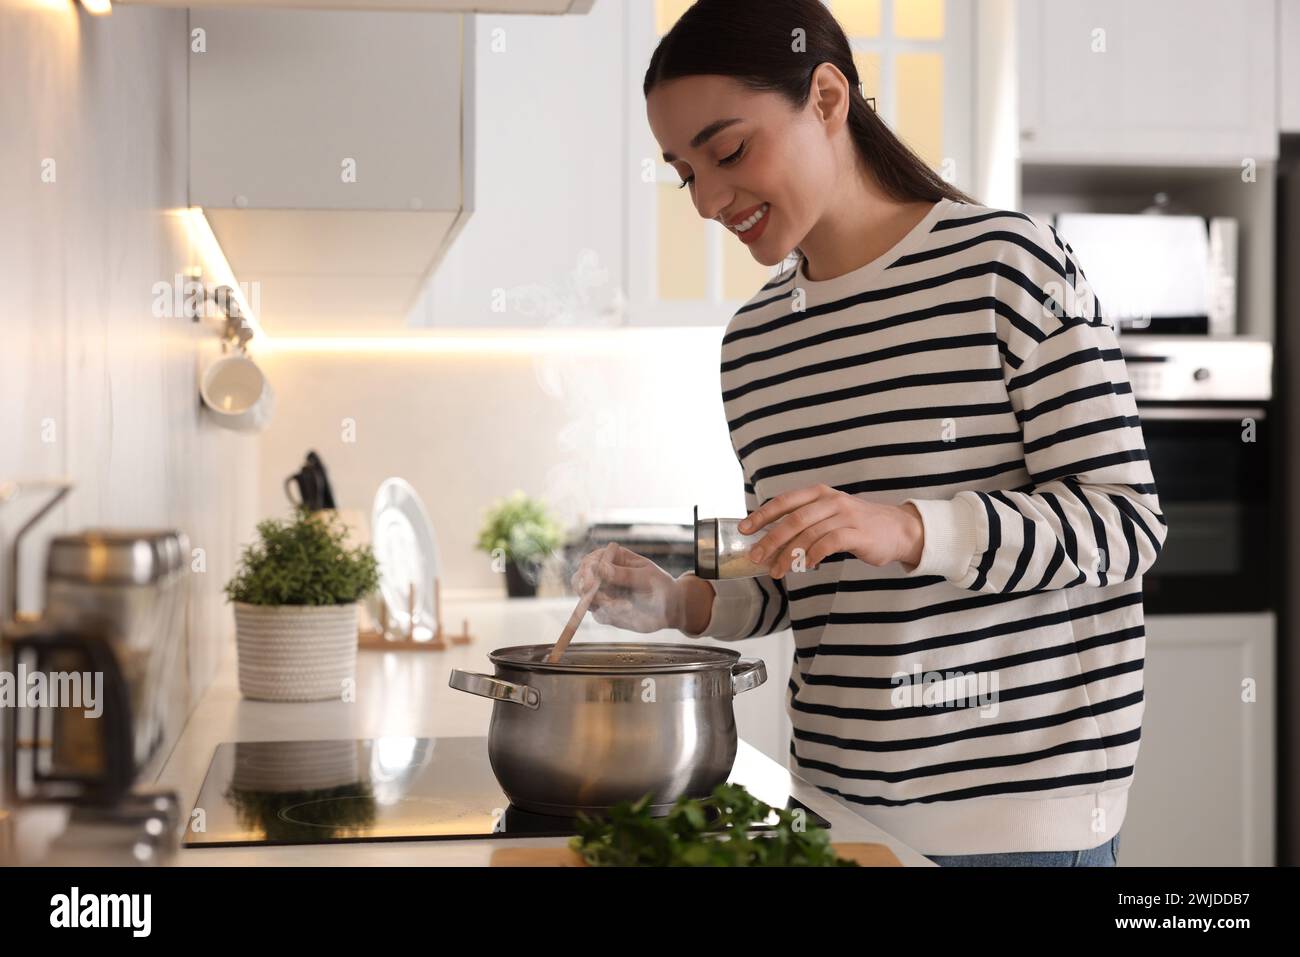 Smiling woman adding spices into pot with soup in kitchen Stock Photo